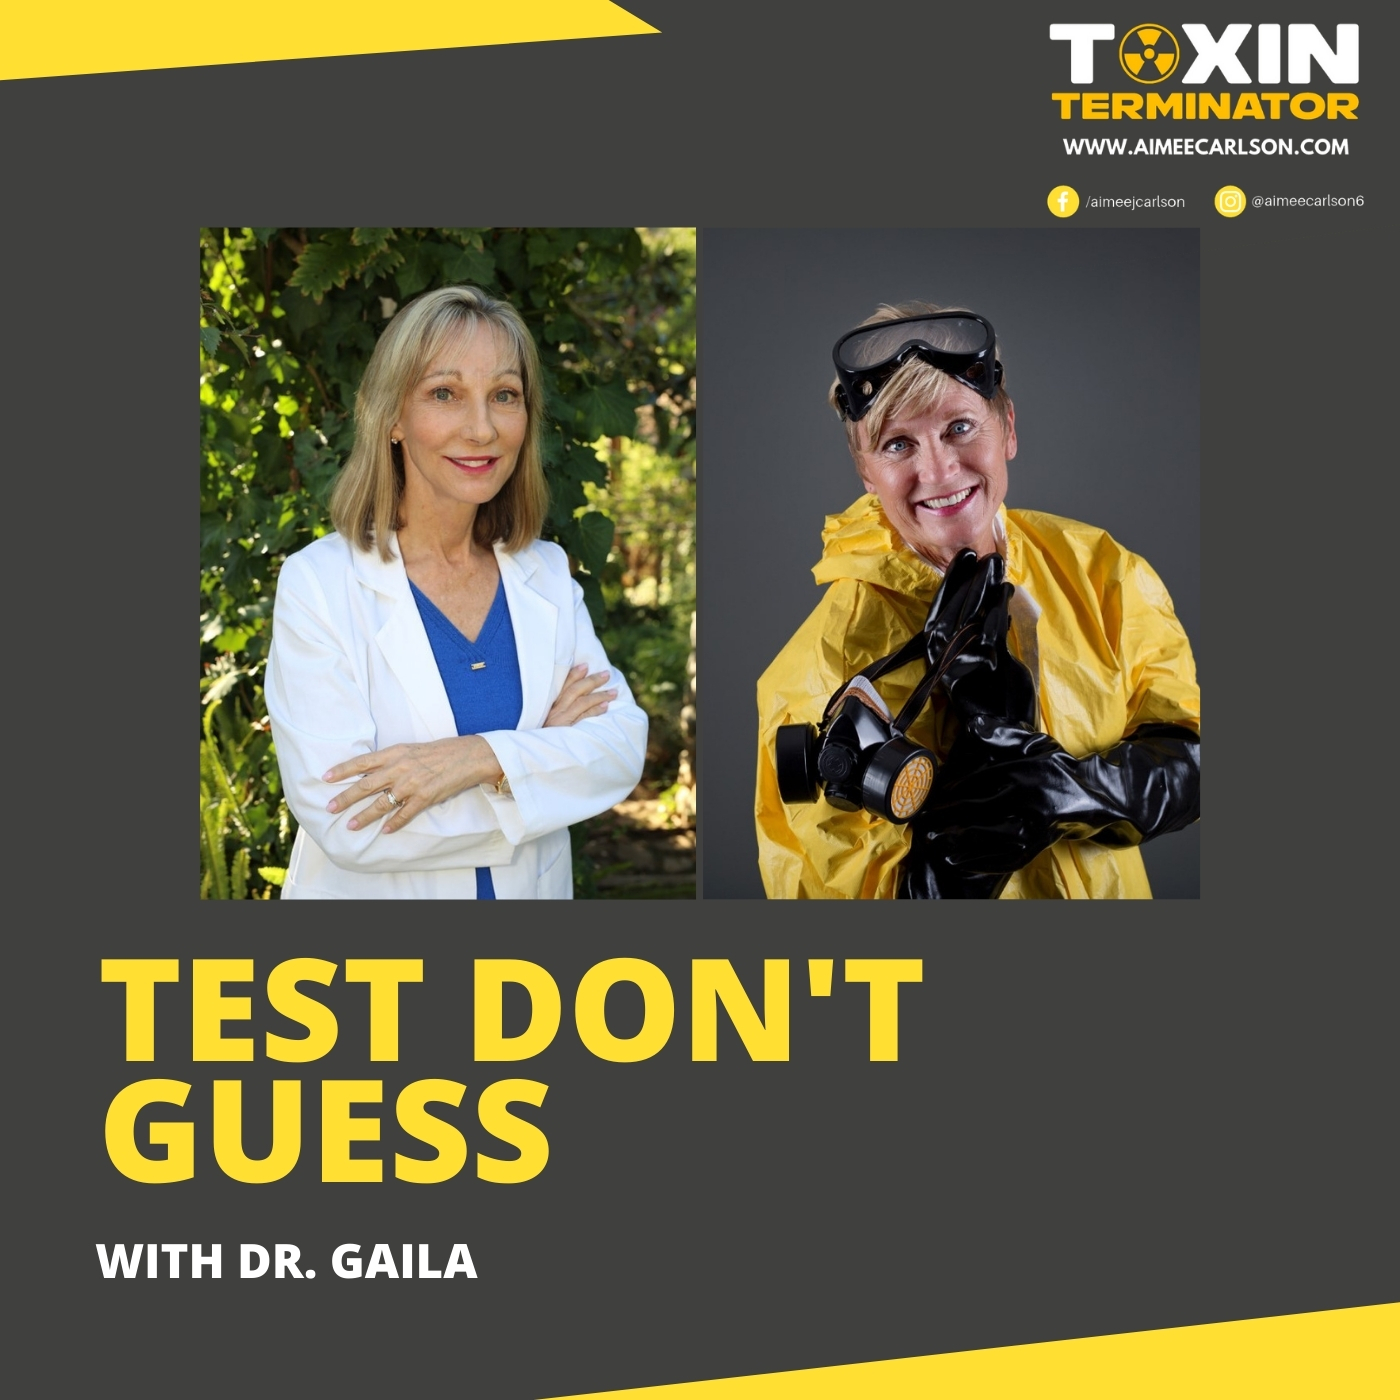 Test Don’t Guess with Dr. Gaila